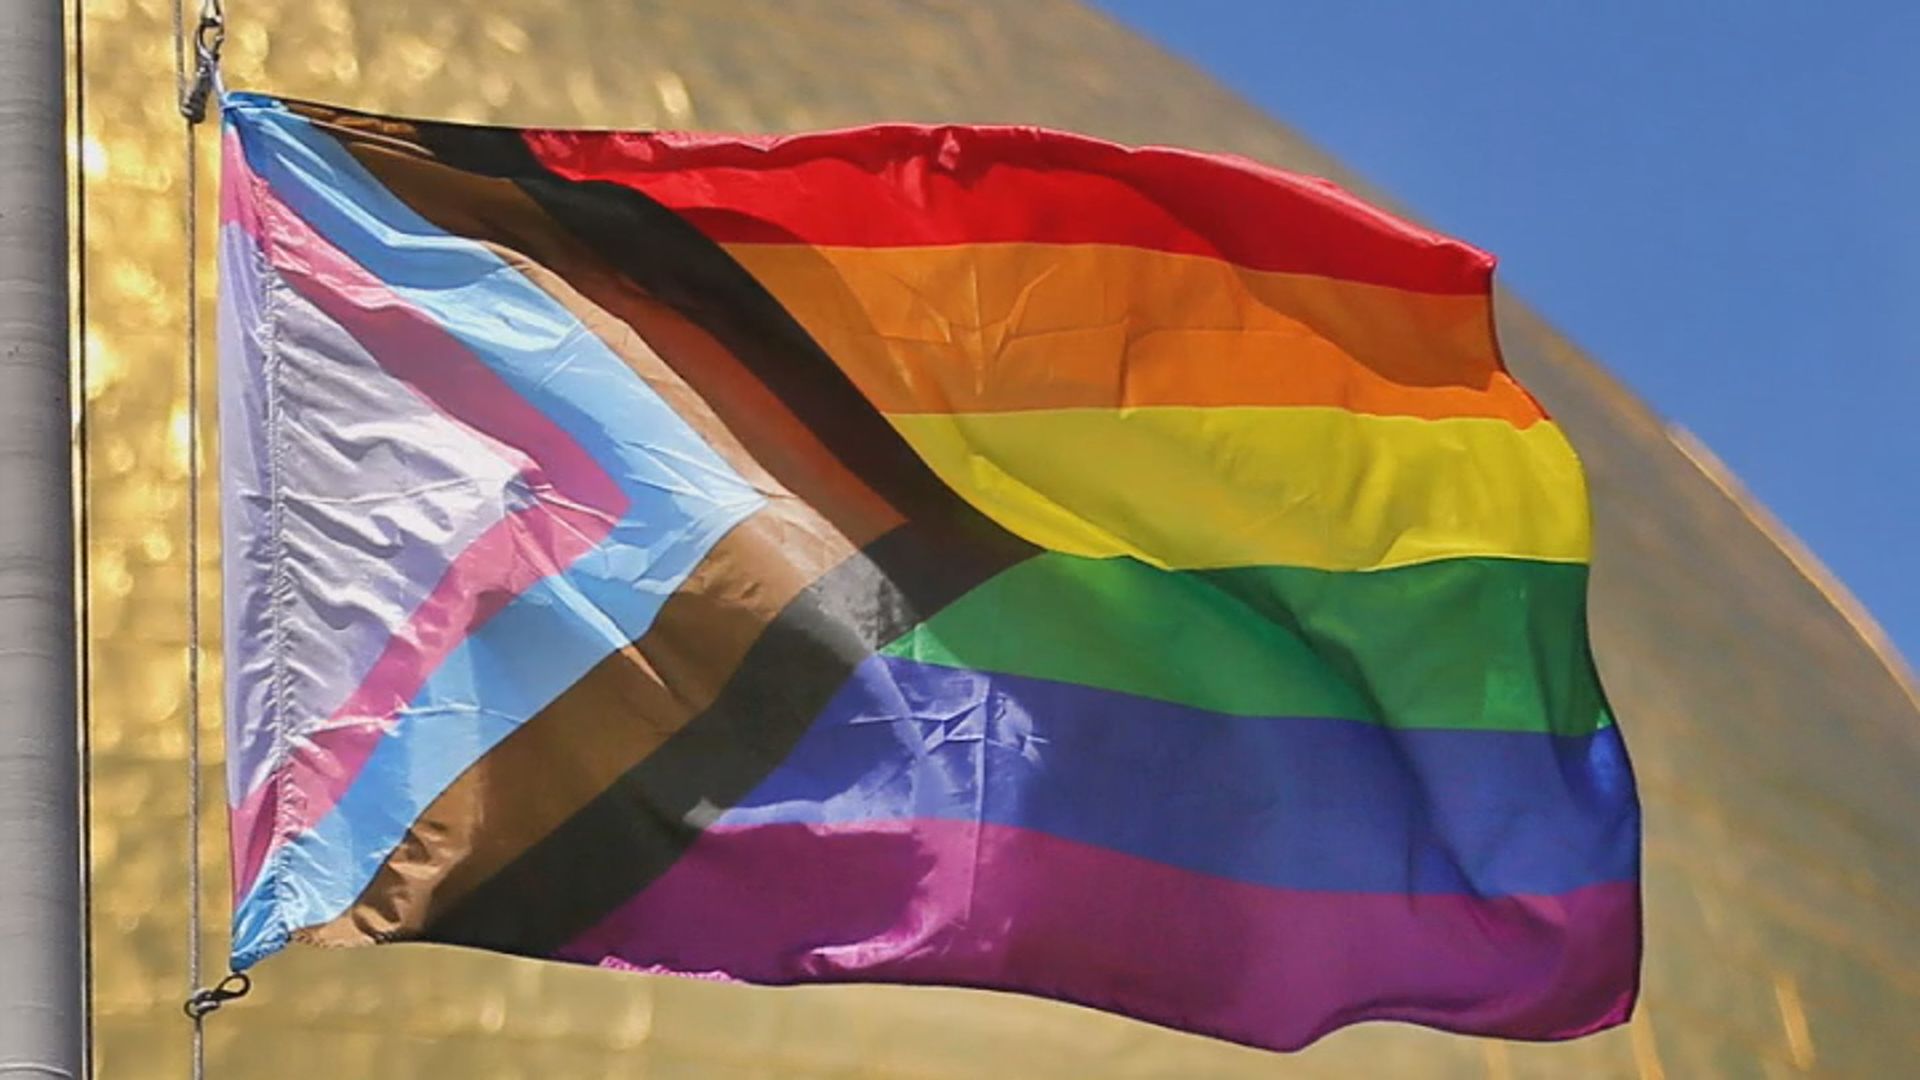 man charged with hate crime for burning gay pride flag